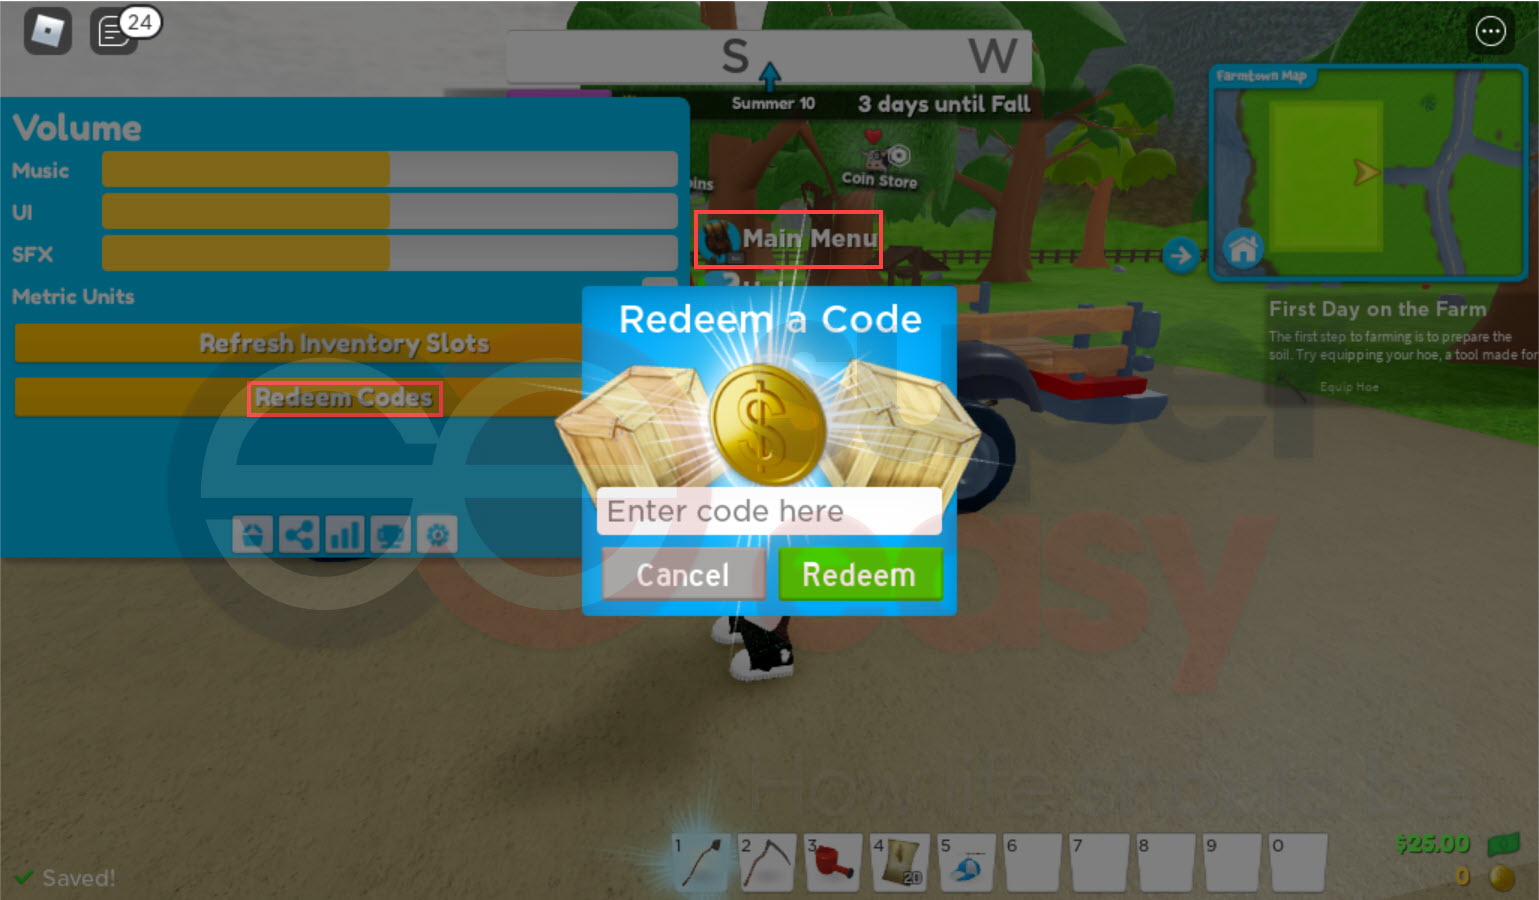 New Roblox Welcome To Farmtown Codes Jul 2021 Super Easy - welcome to farmtown codes roblox